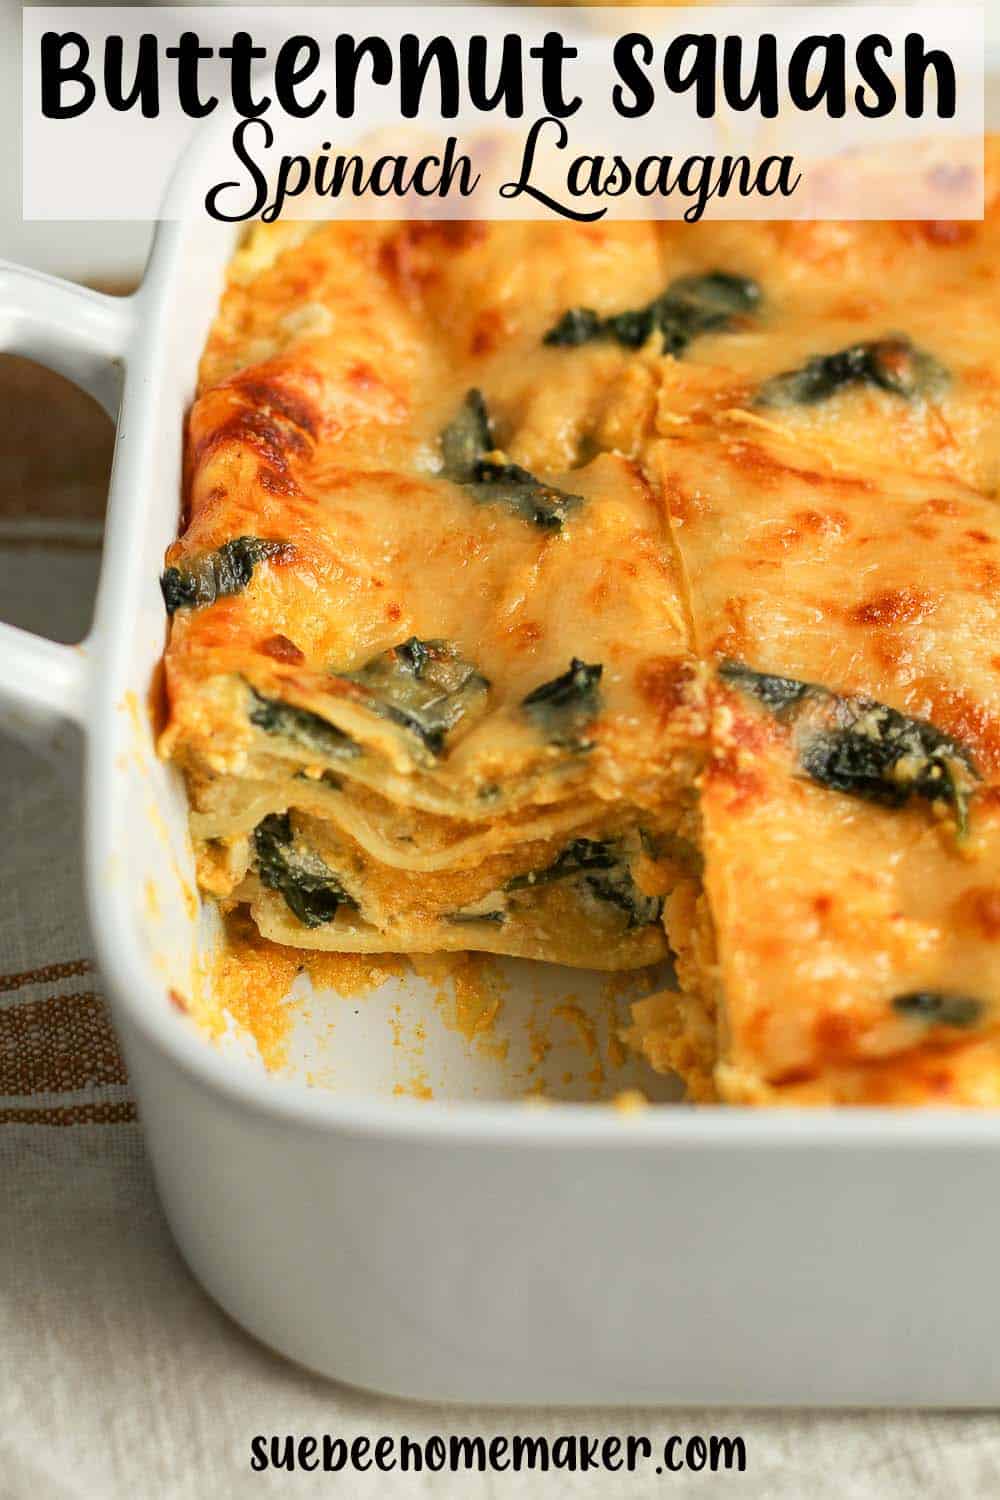 Side view of a casserole dish with butternut squash spinach lasagna.